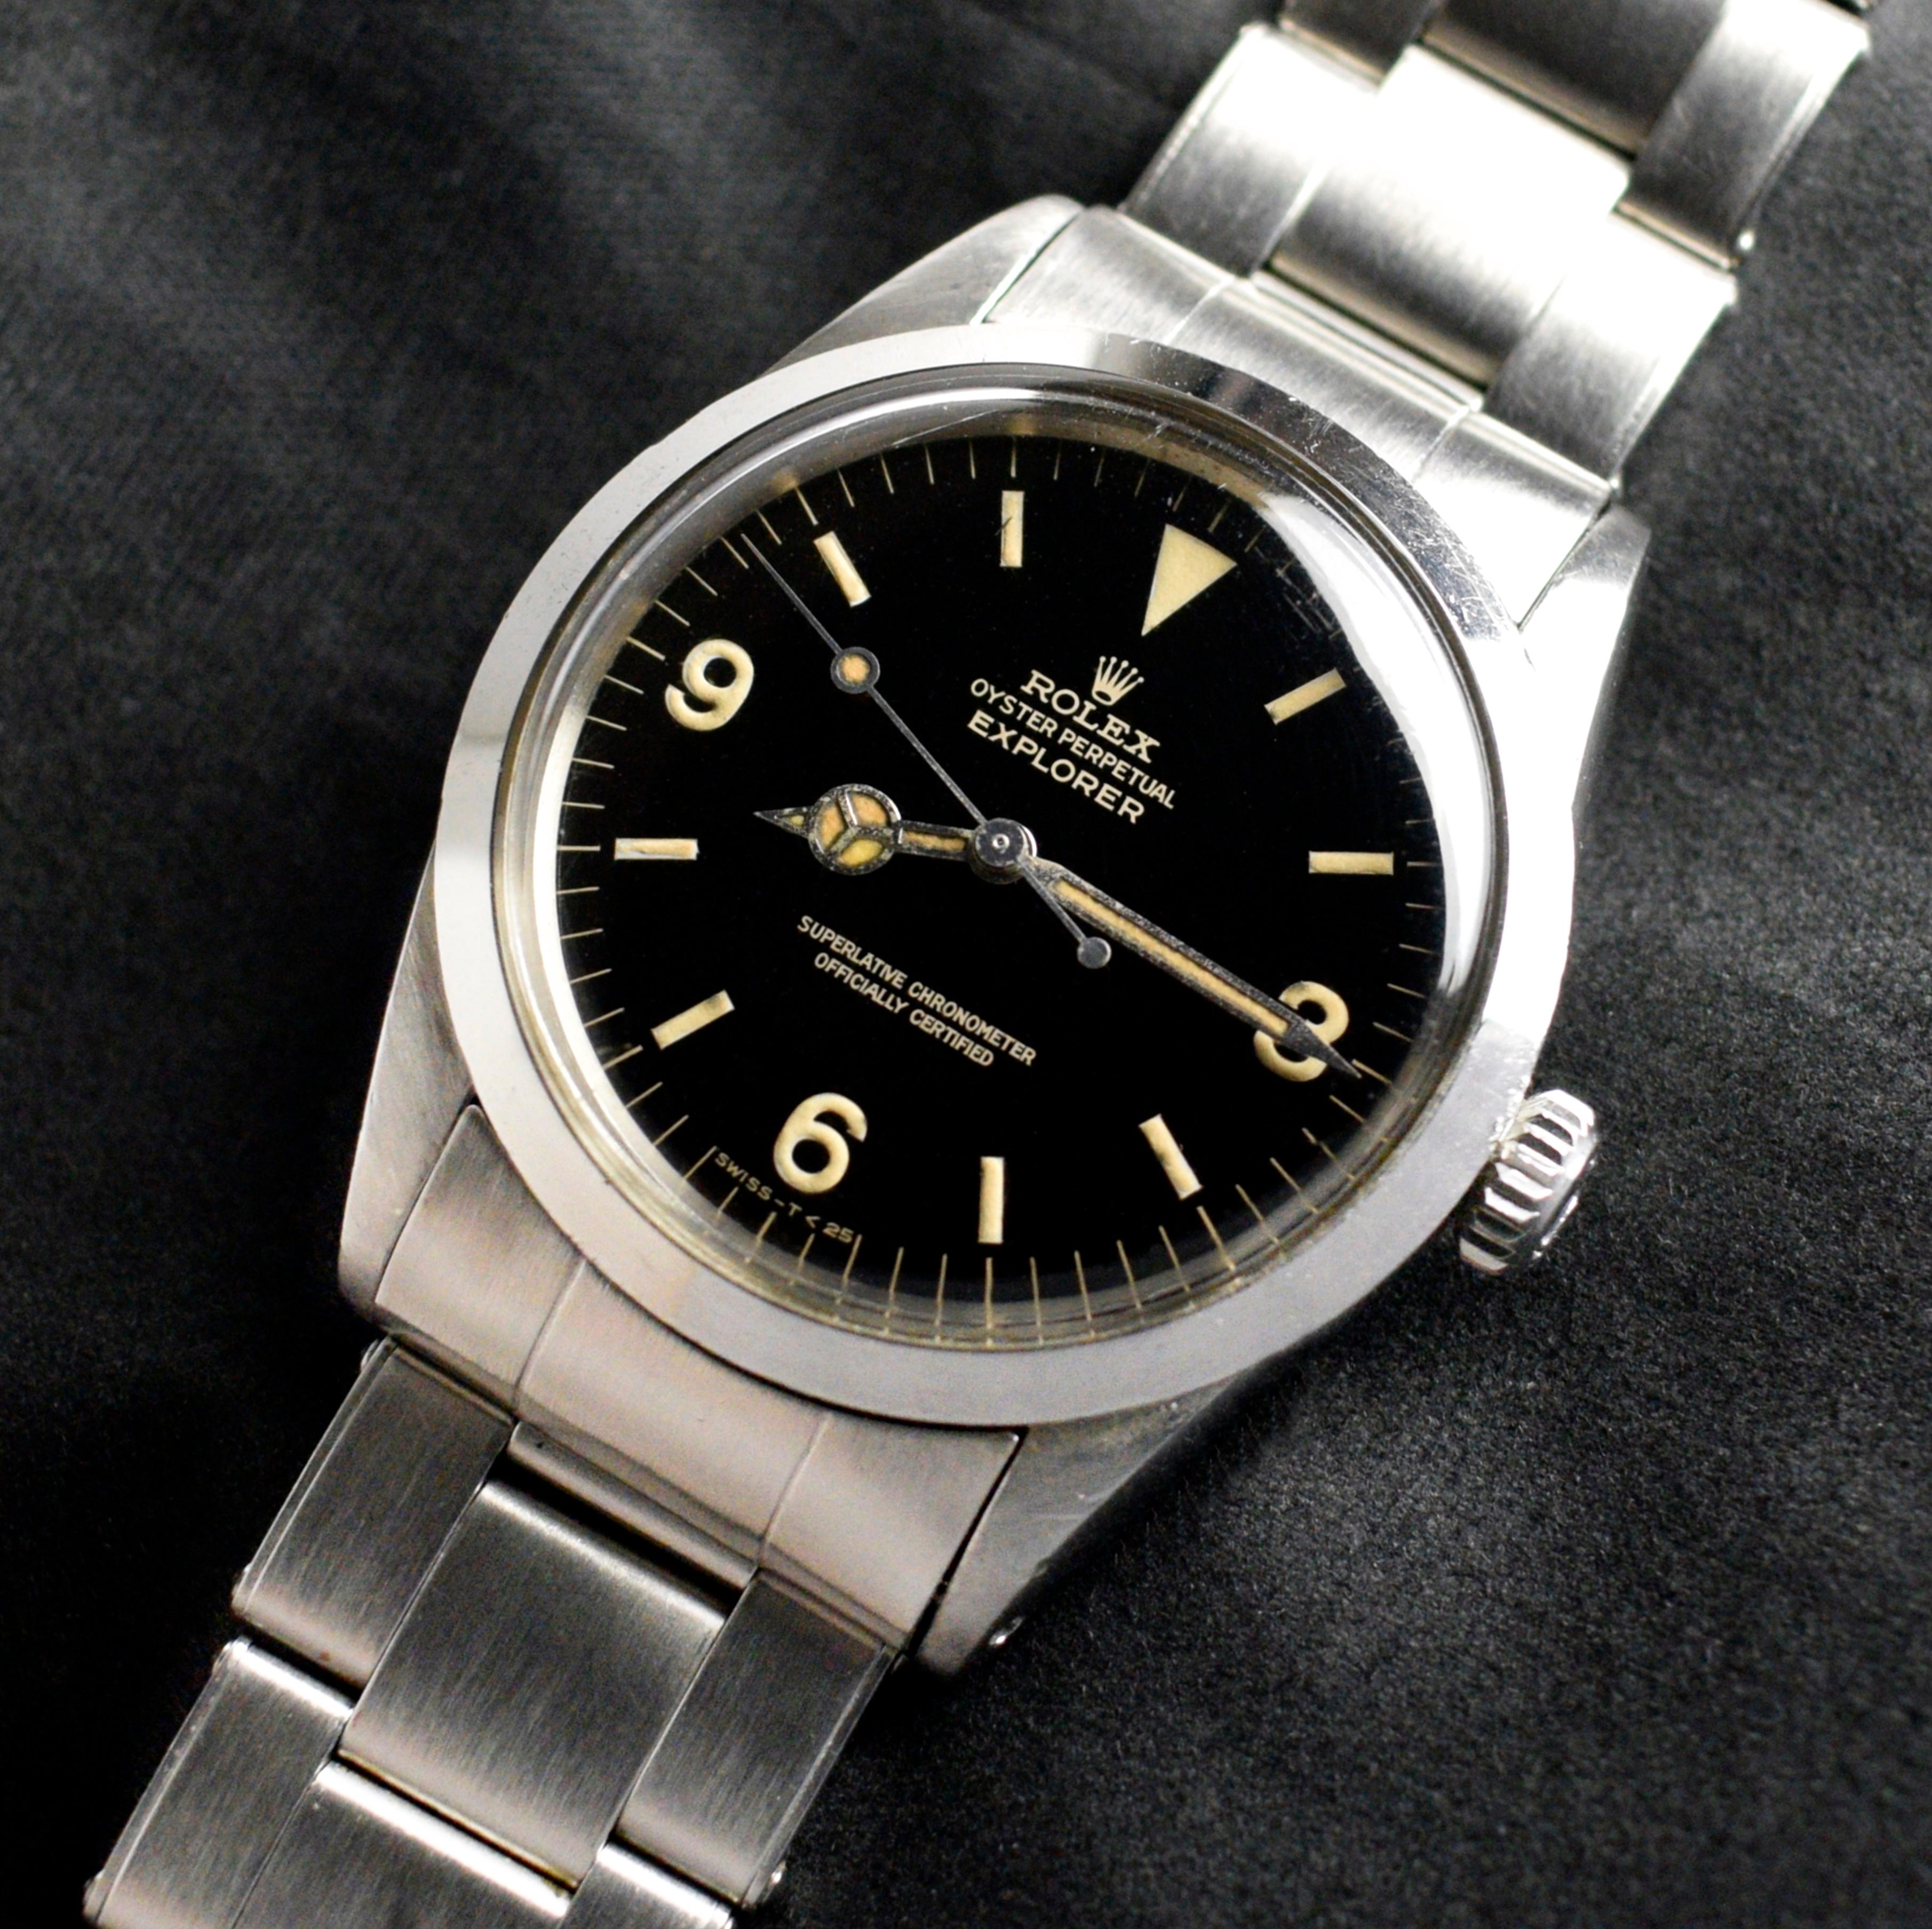 Brand: Vintage Rolex
Model: 1016
Year: 1966
Serial number: 15xxxxx
Reference: OT1578

Case: Show sign of wear with slight polish from previous; inner case back stamped 1016 VI.66

Dial: Super Glossy Smooth Black Gilt Dial where there are minor